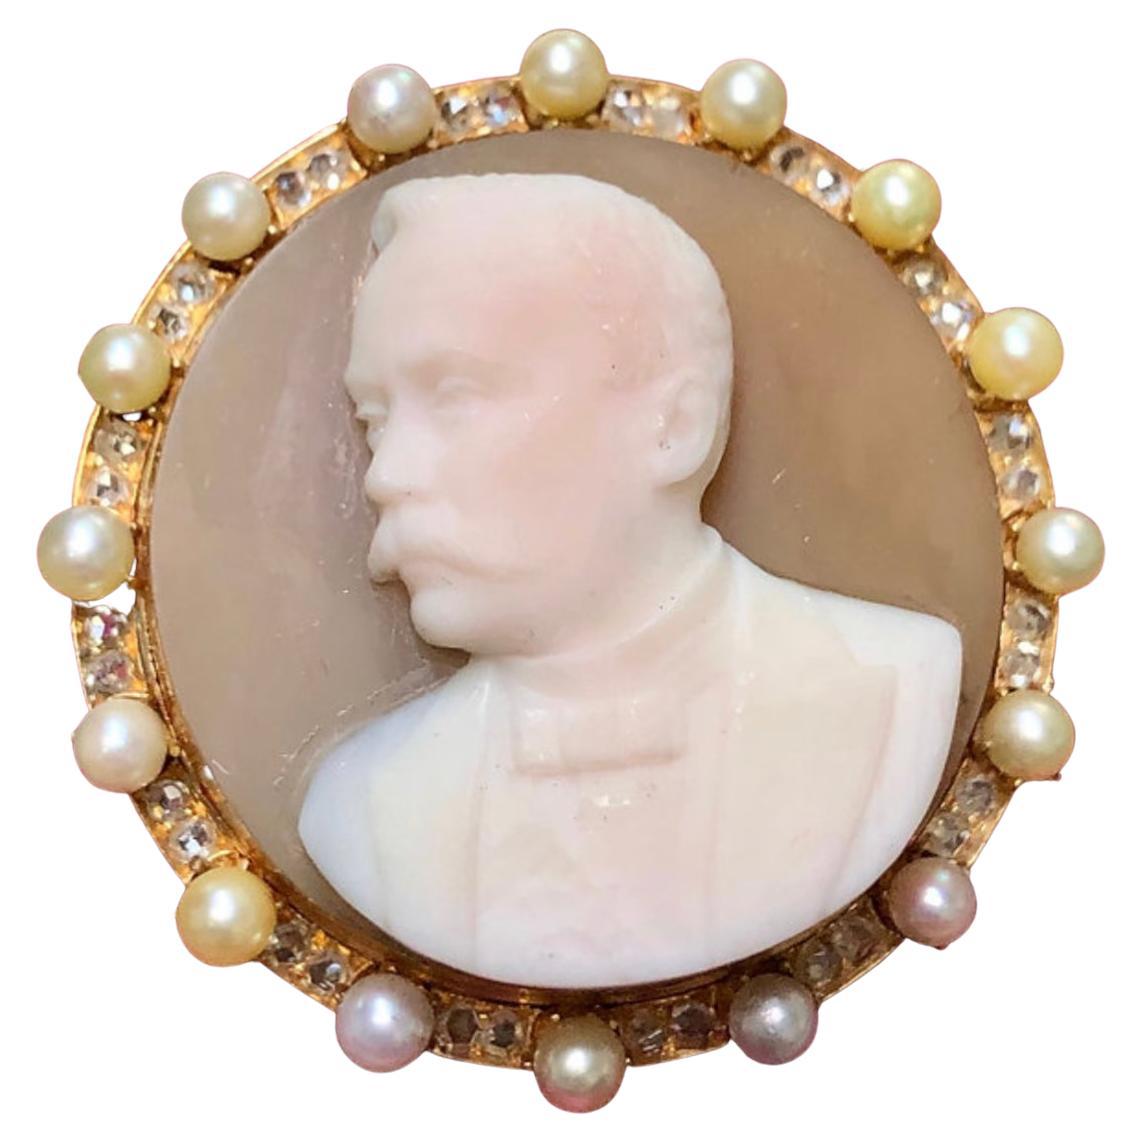 What Stone is a cameo made of?